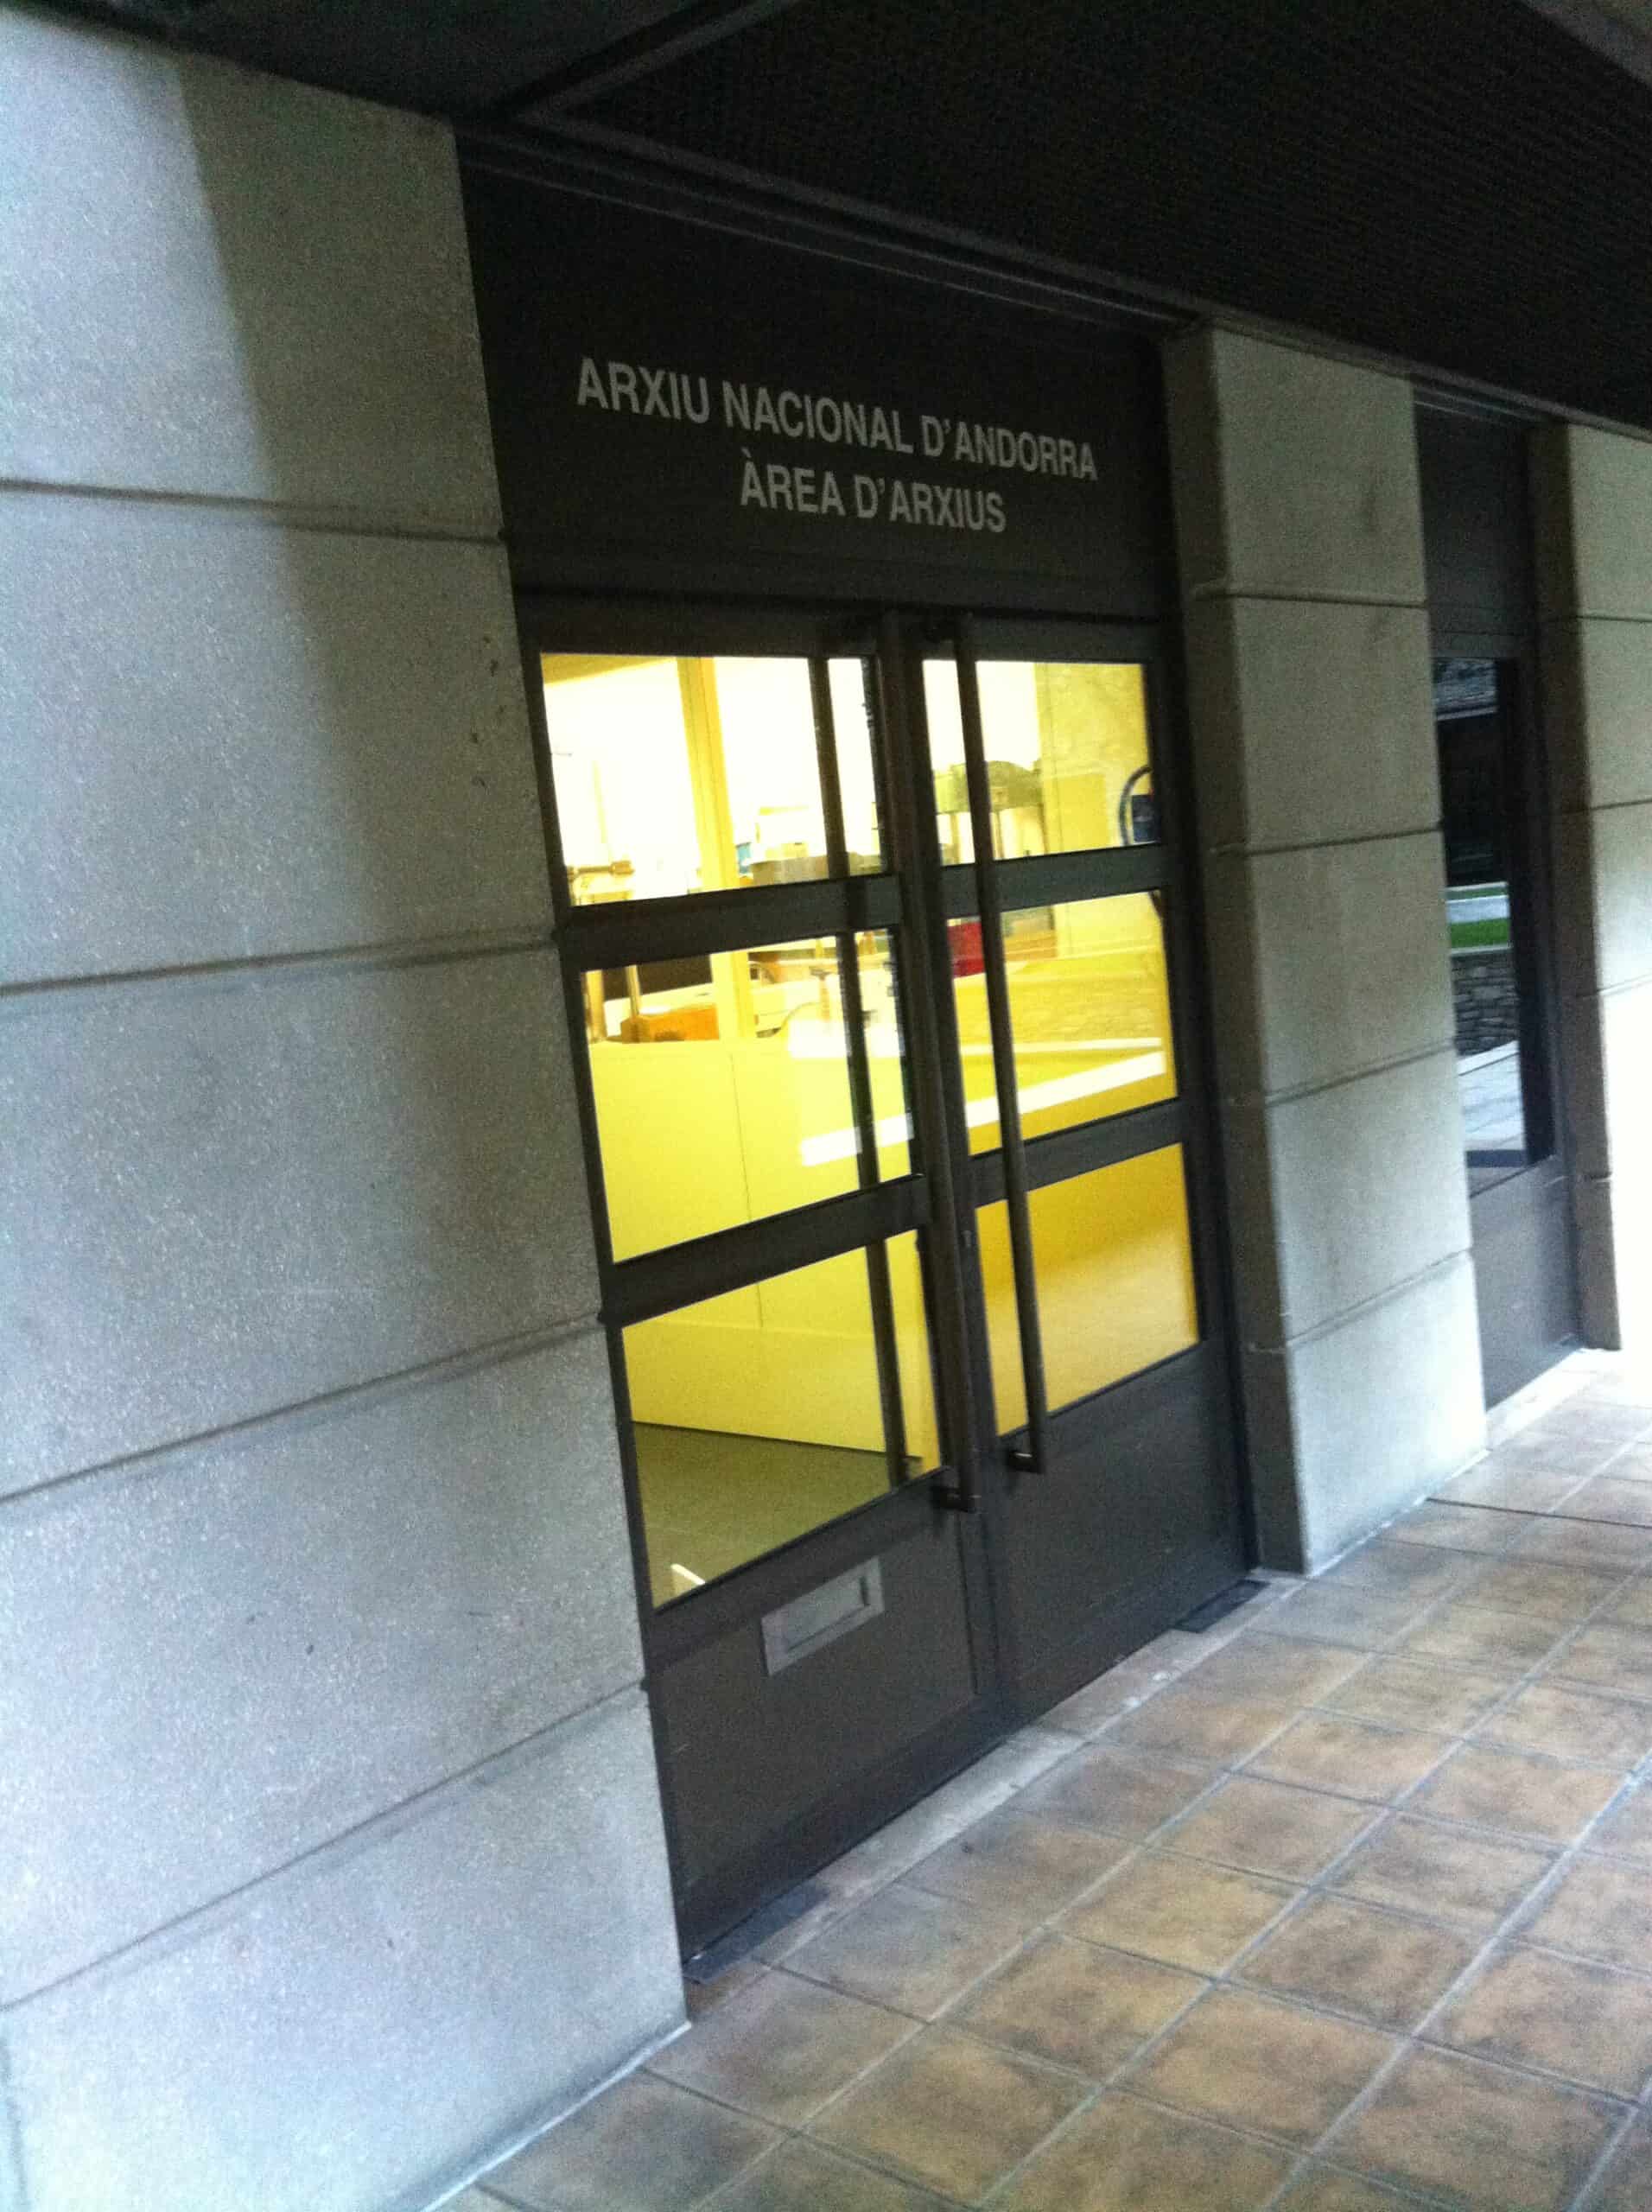 National archives of Andorra